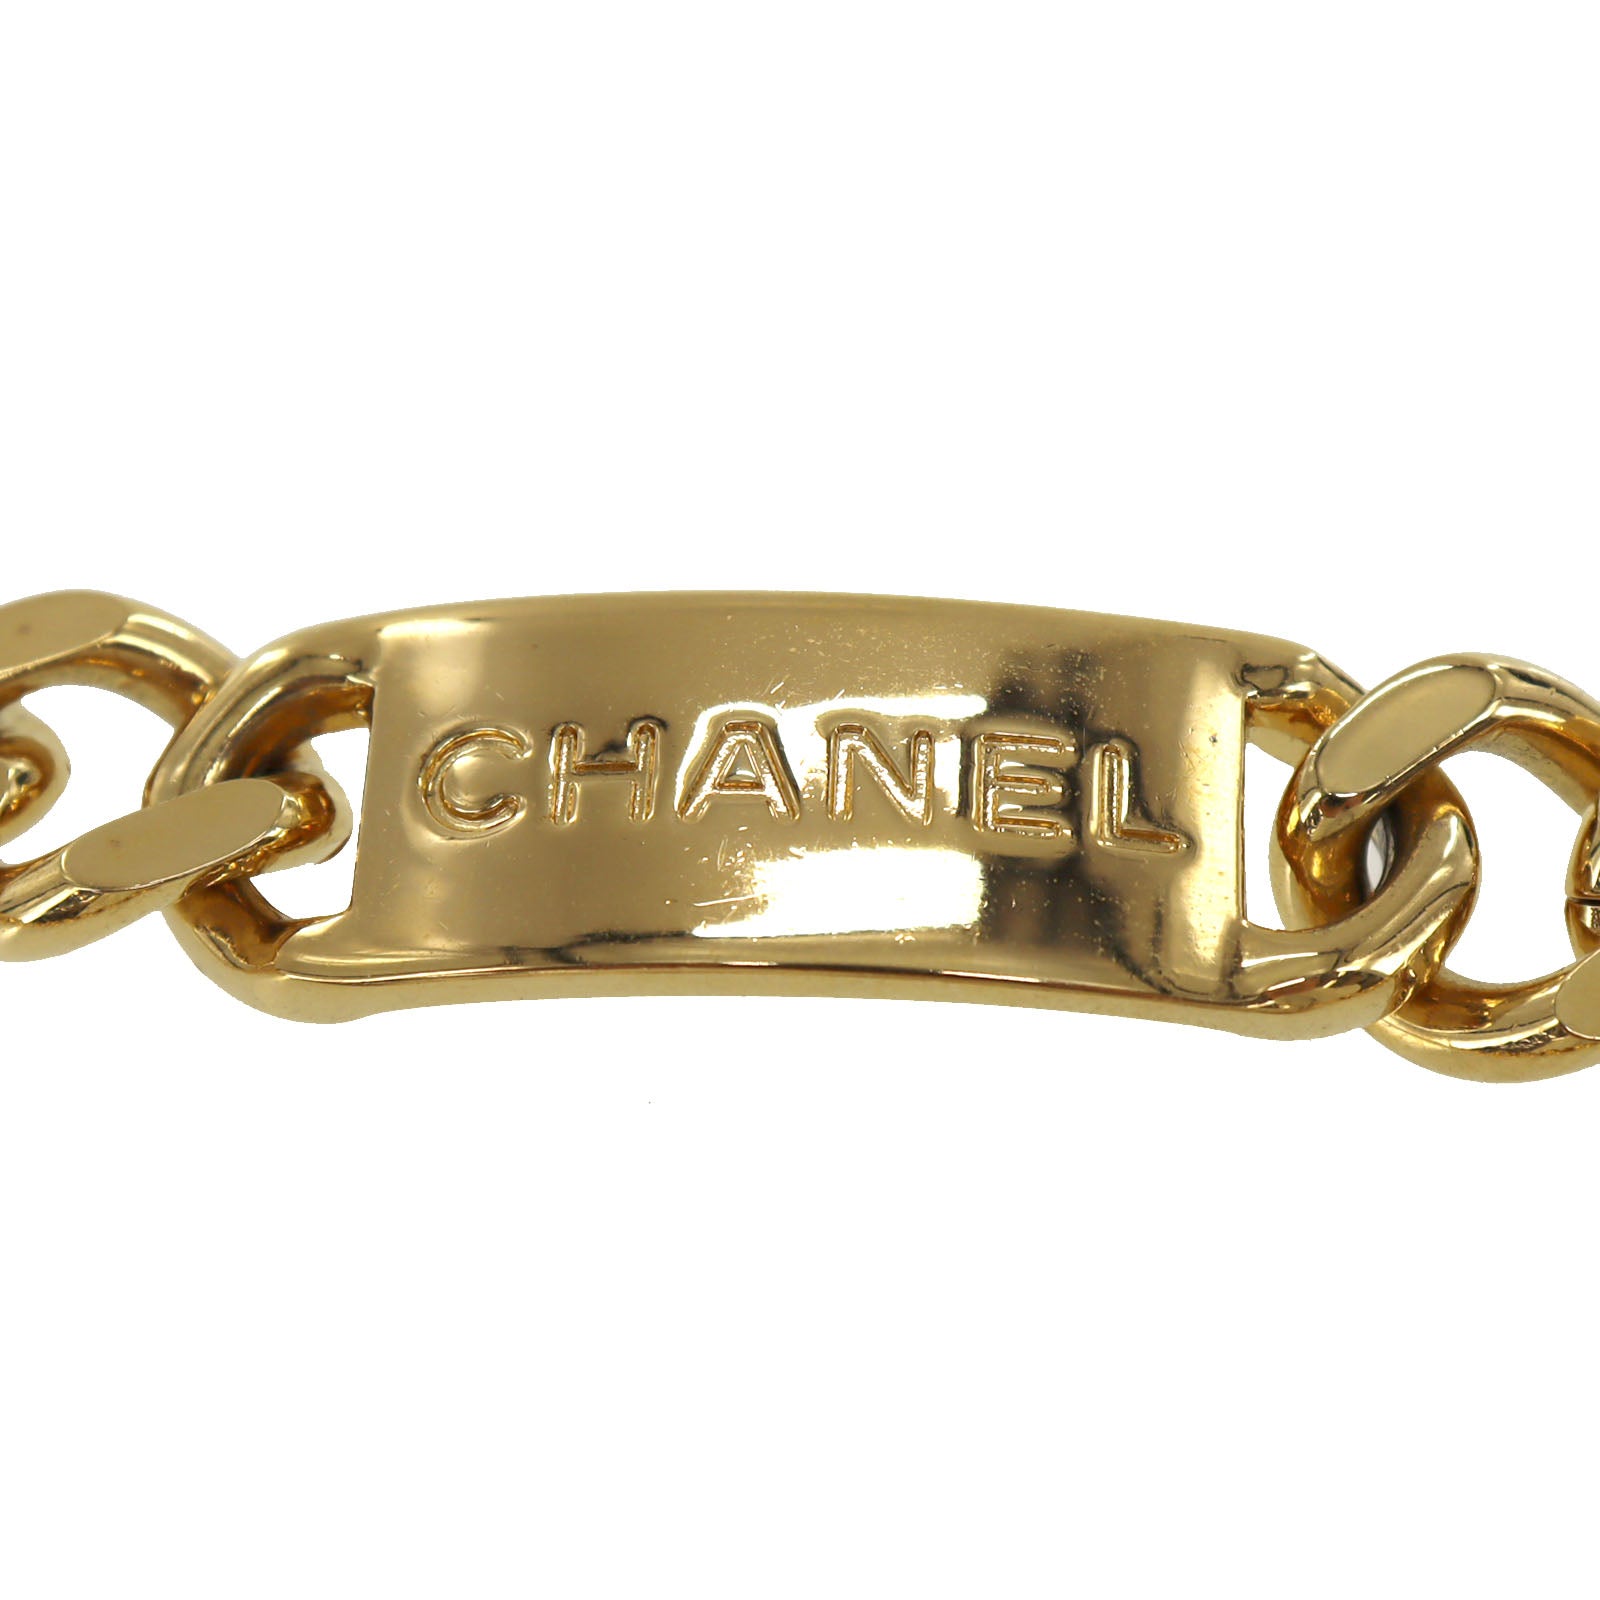 Sold at Auction: CHANEL RUE CAMBON Gold Tone Chain Belt, FRANCE